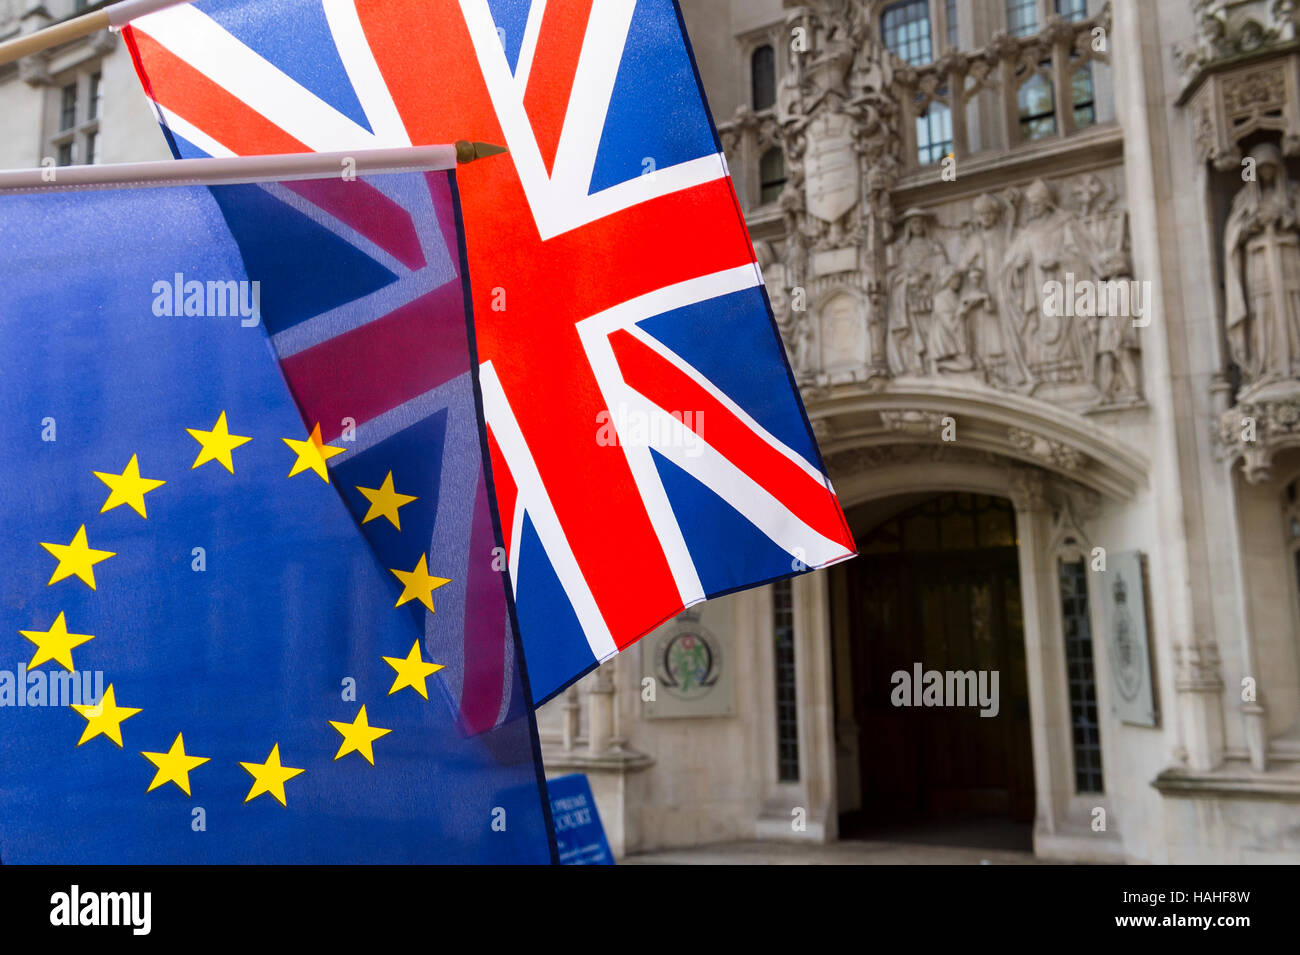 EU and Union Jack flags flying in front of The Supreme Court of the United Kingdom in the public Middlesex Guildhall in London Stock Photo